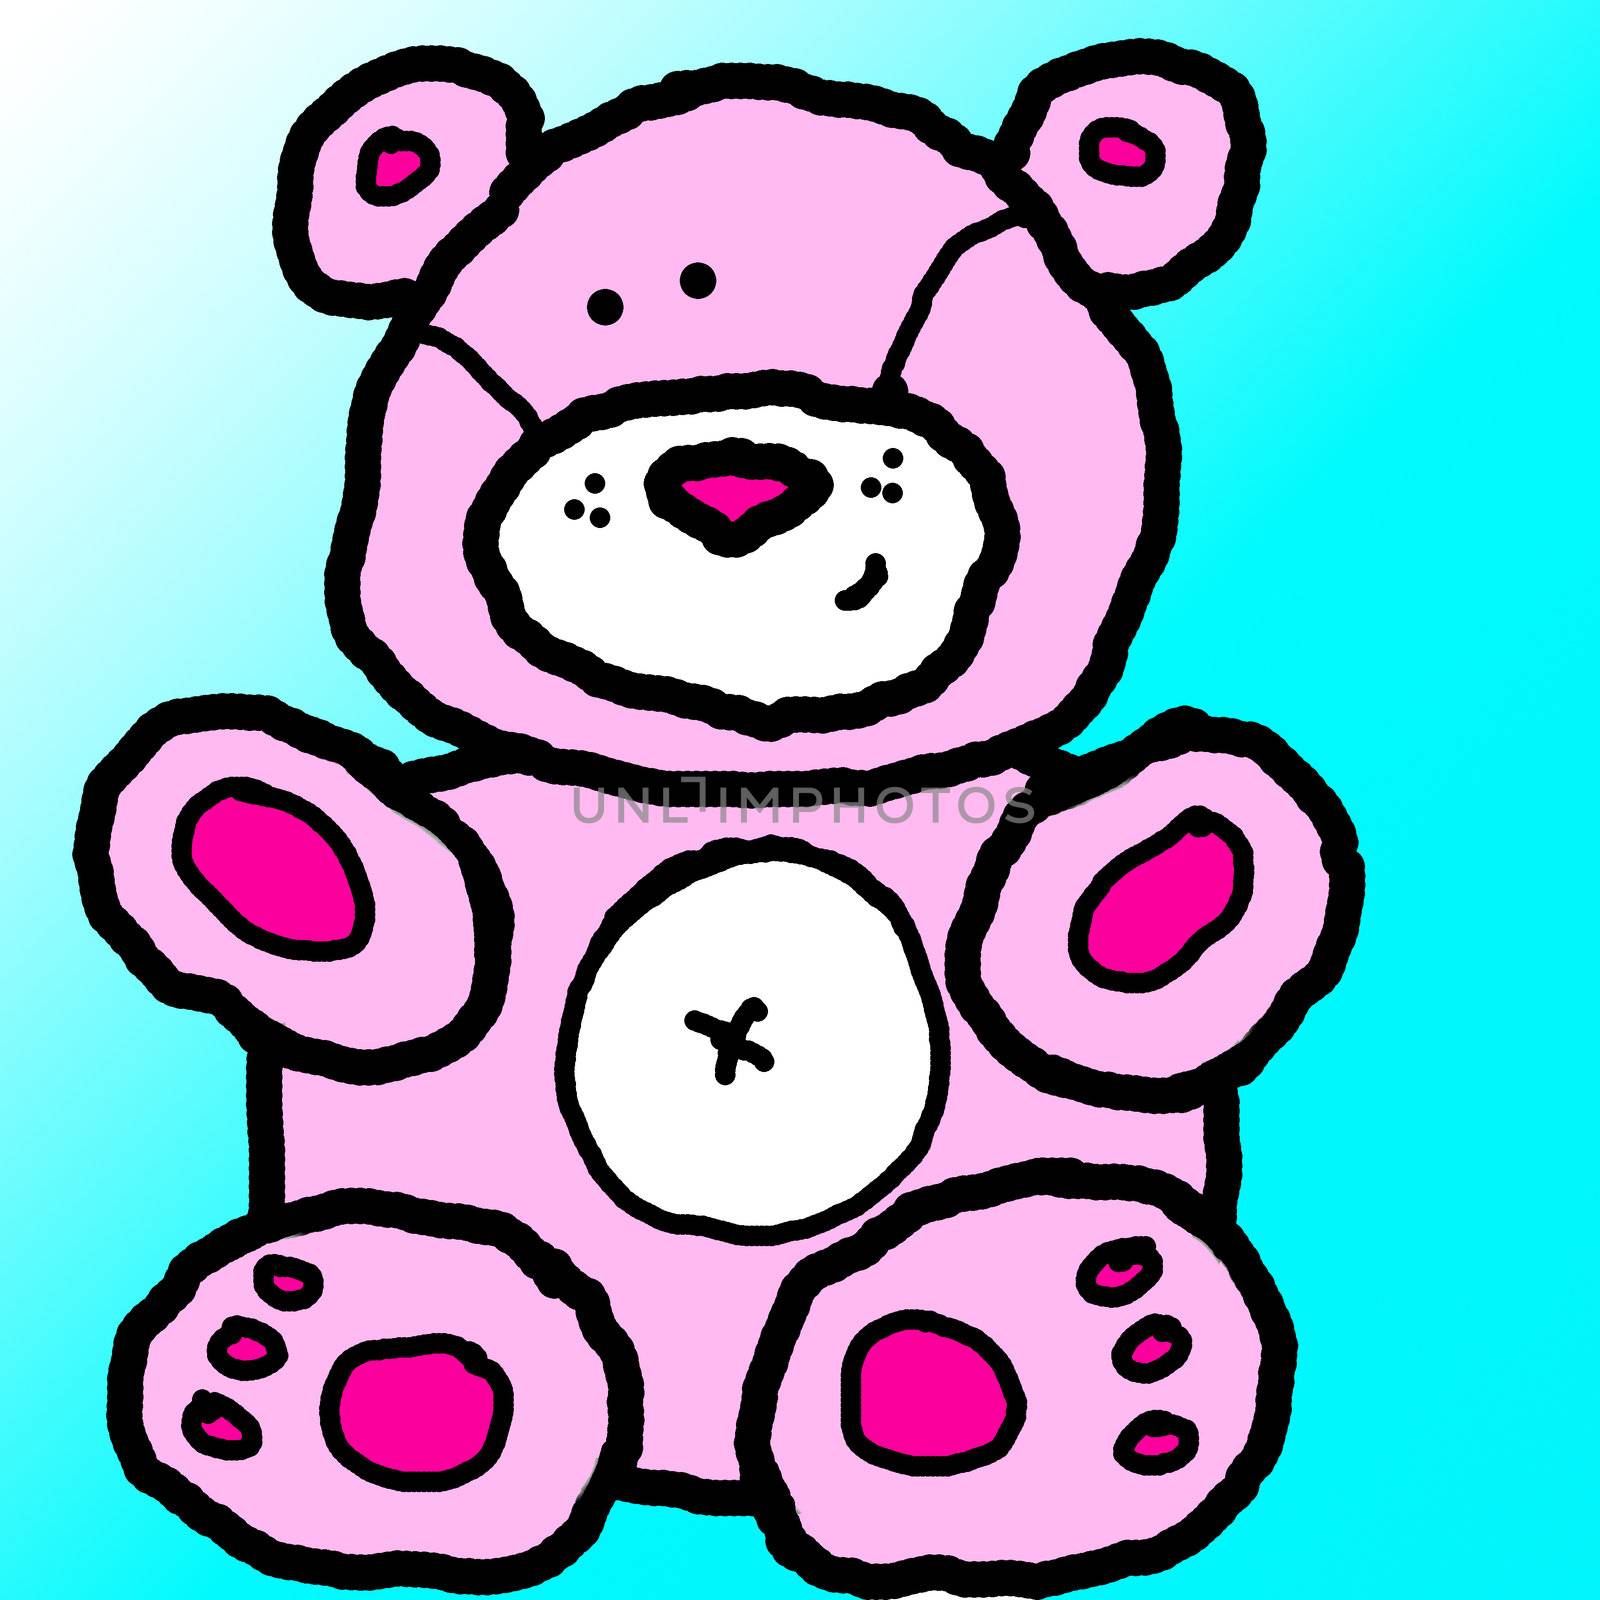 A cute pink teddy bear with a ble background.